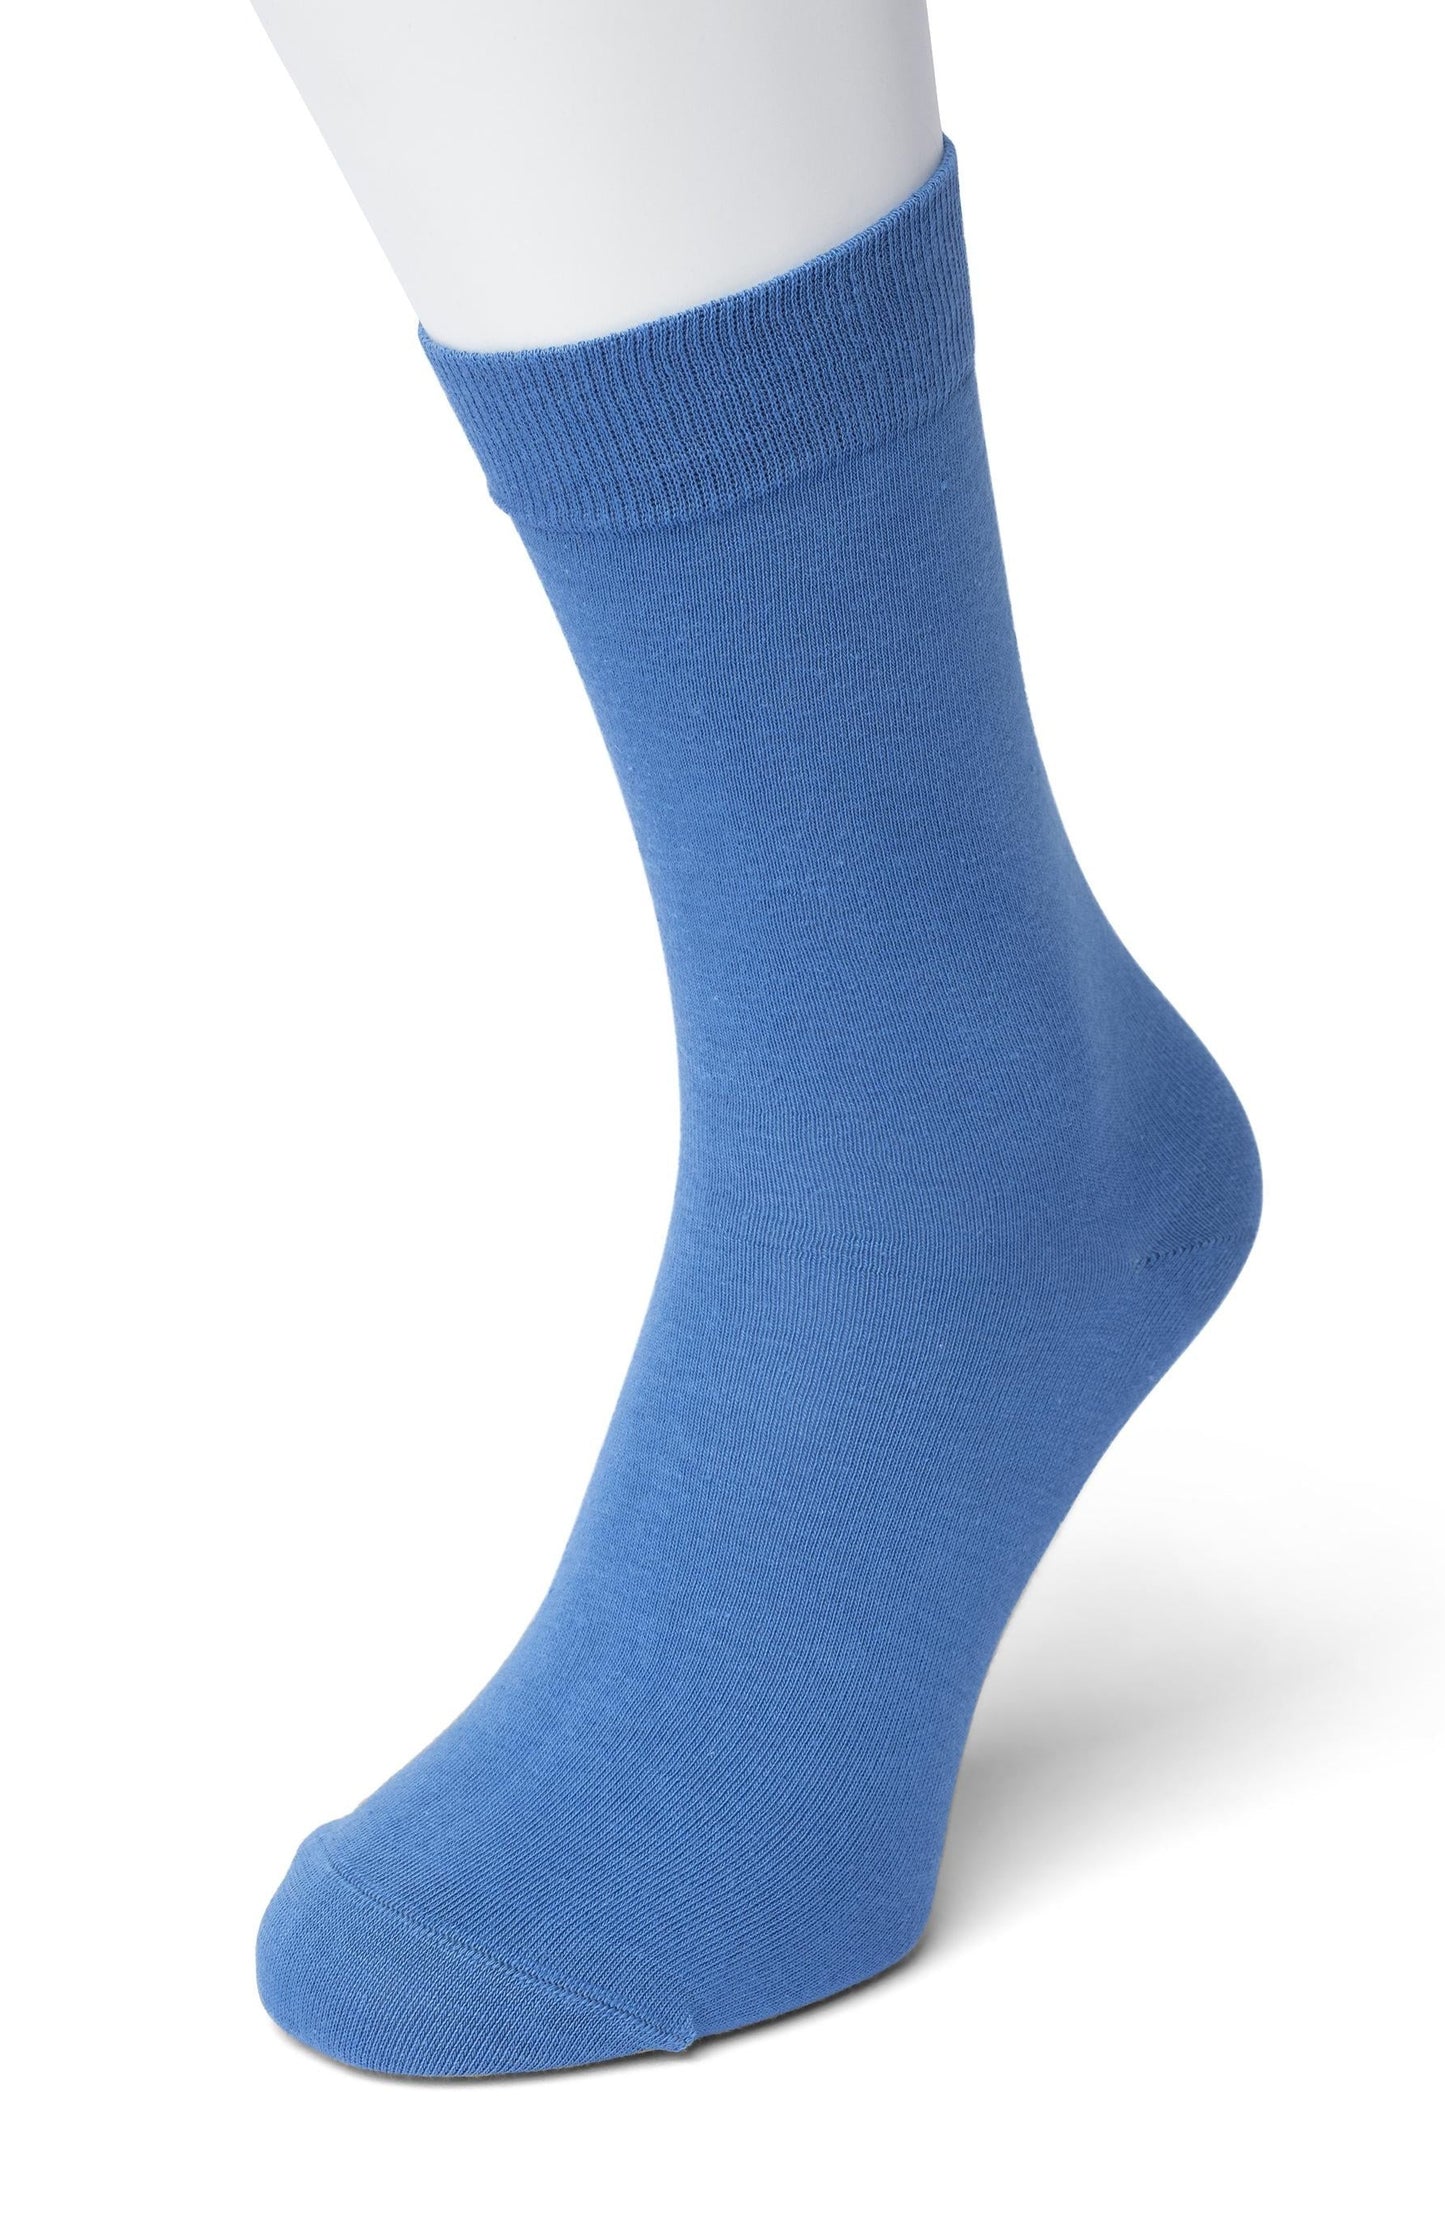 Bonnie Doon 83422 Cotton Sock - Sky Blue (inky turquoise) ankle socks available in women sizes